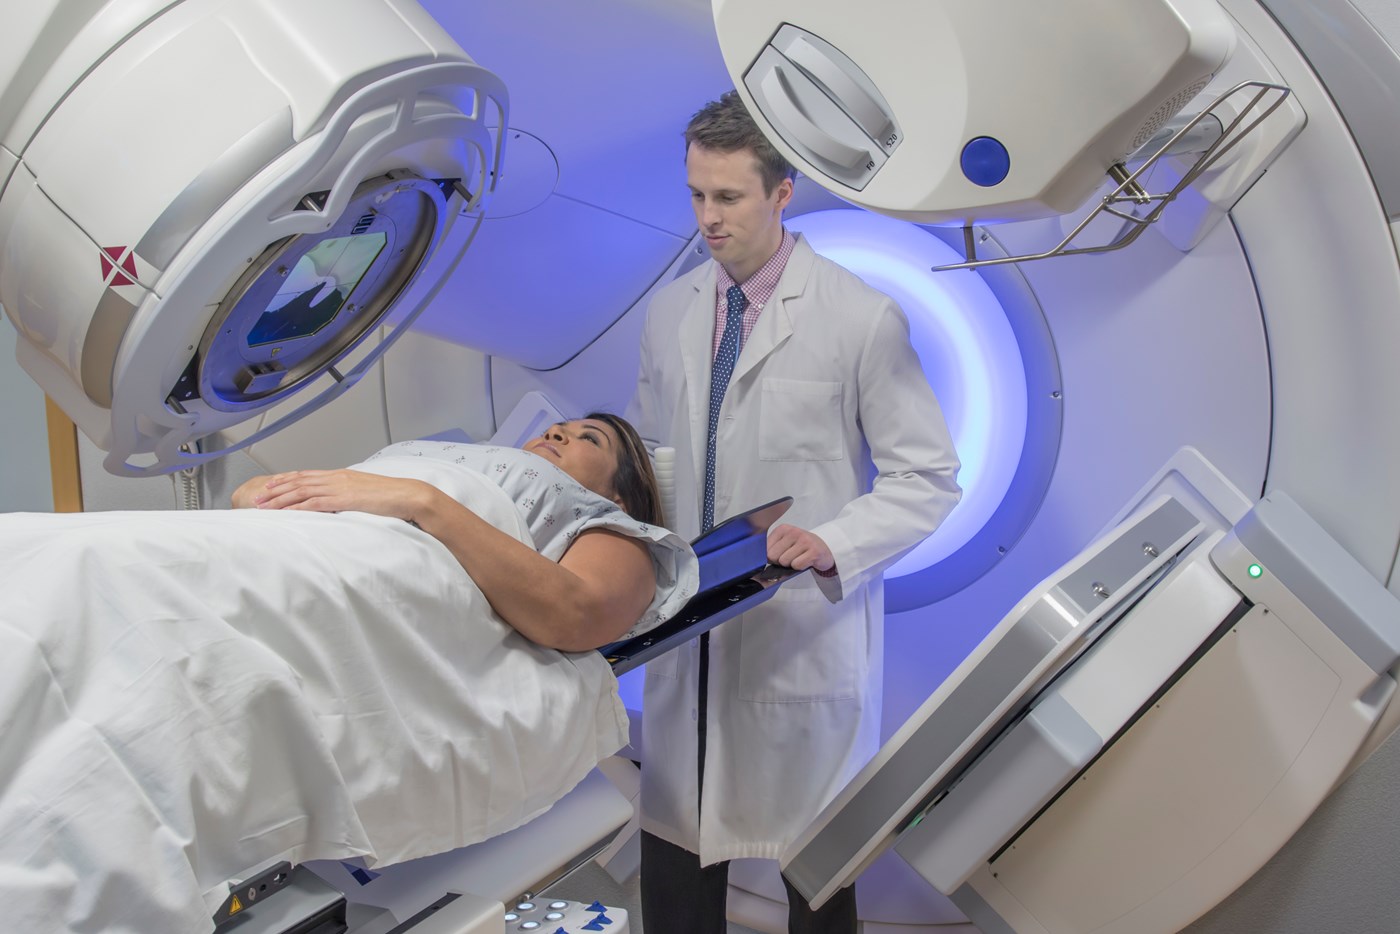 Patient is prepared for image-guided radiation therapy.